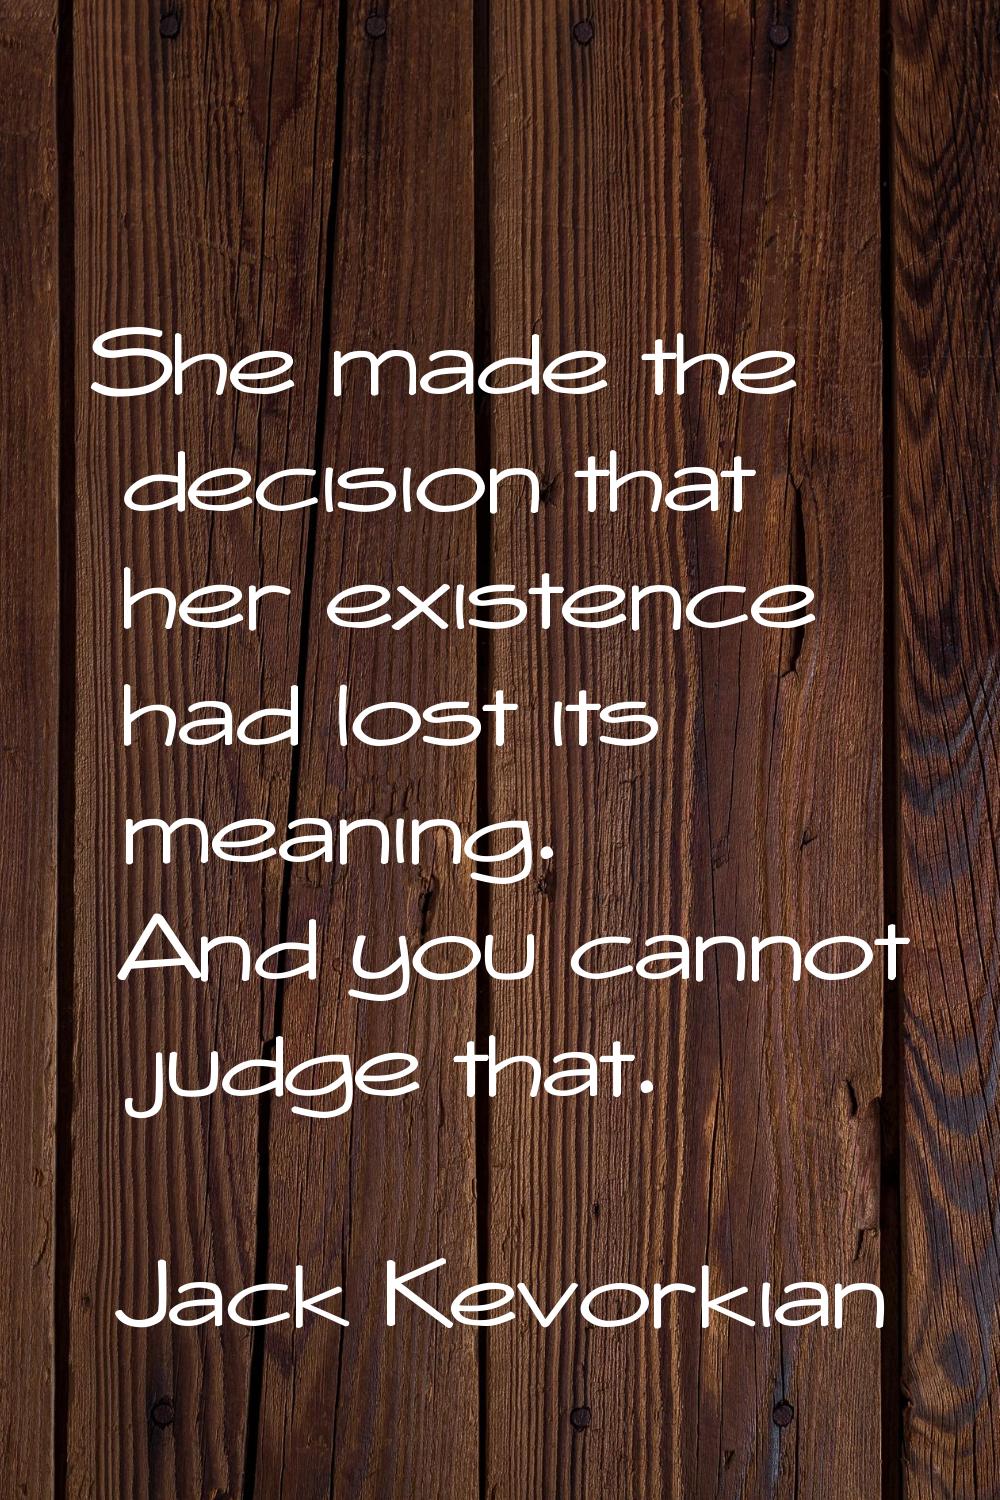 She made the decision that her existence had lost its meaning. And you cannot judge that.